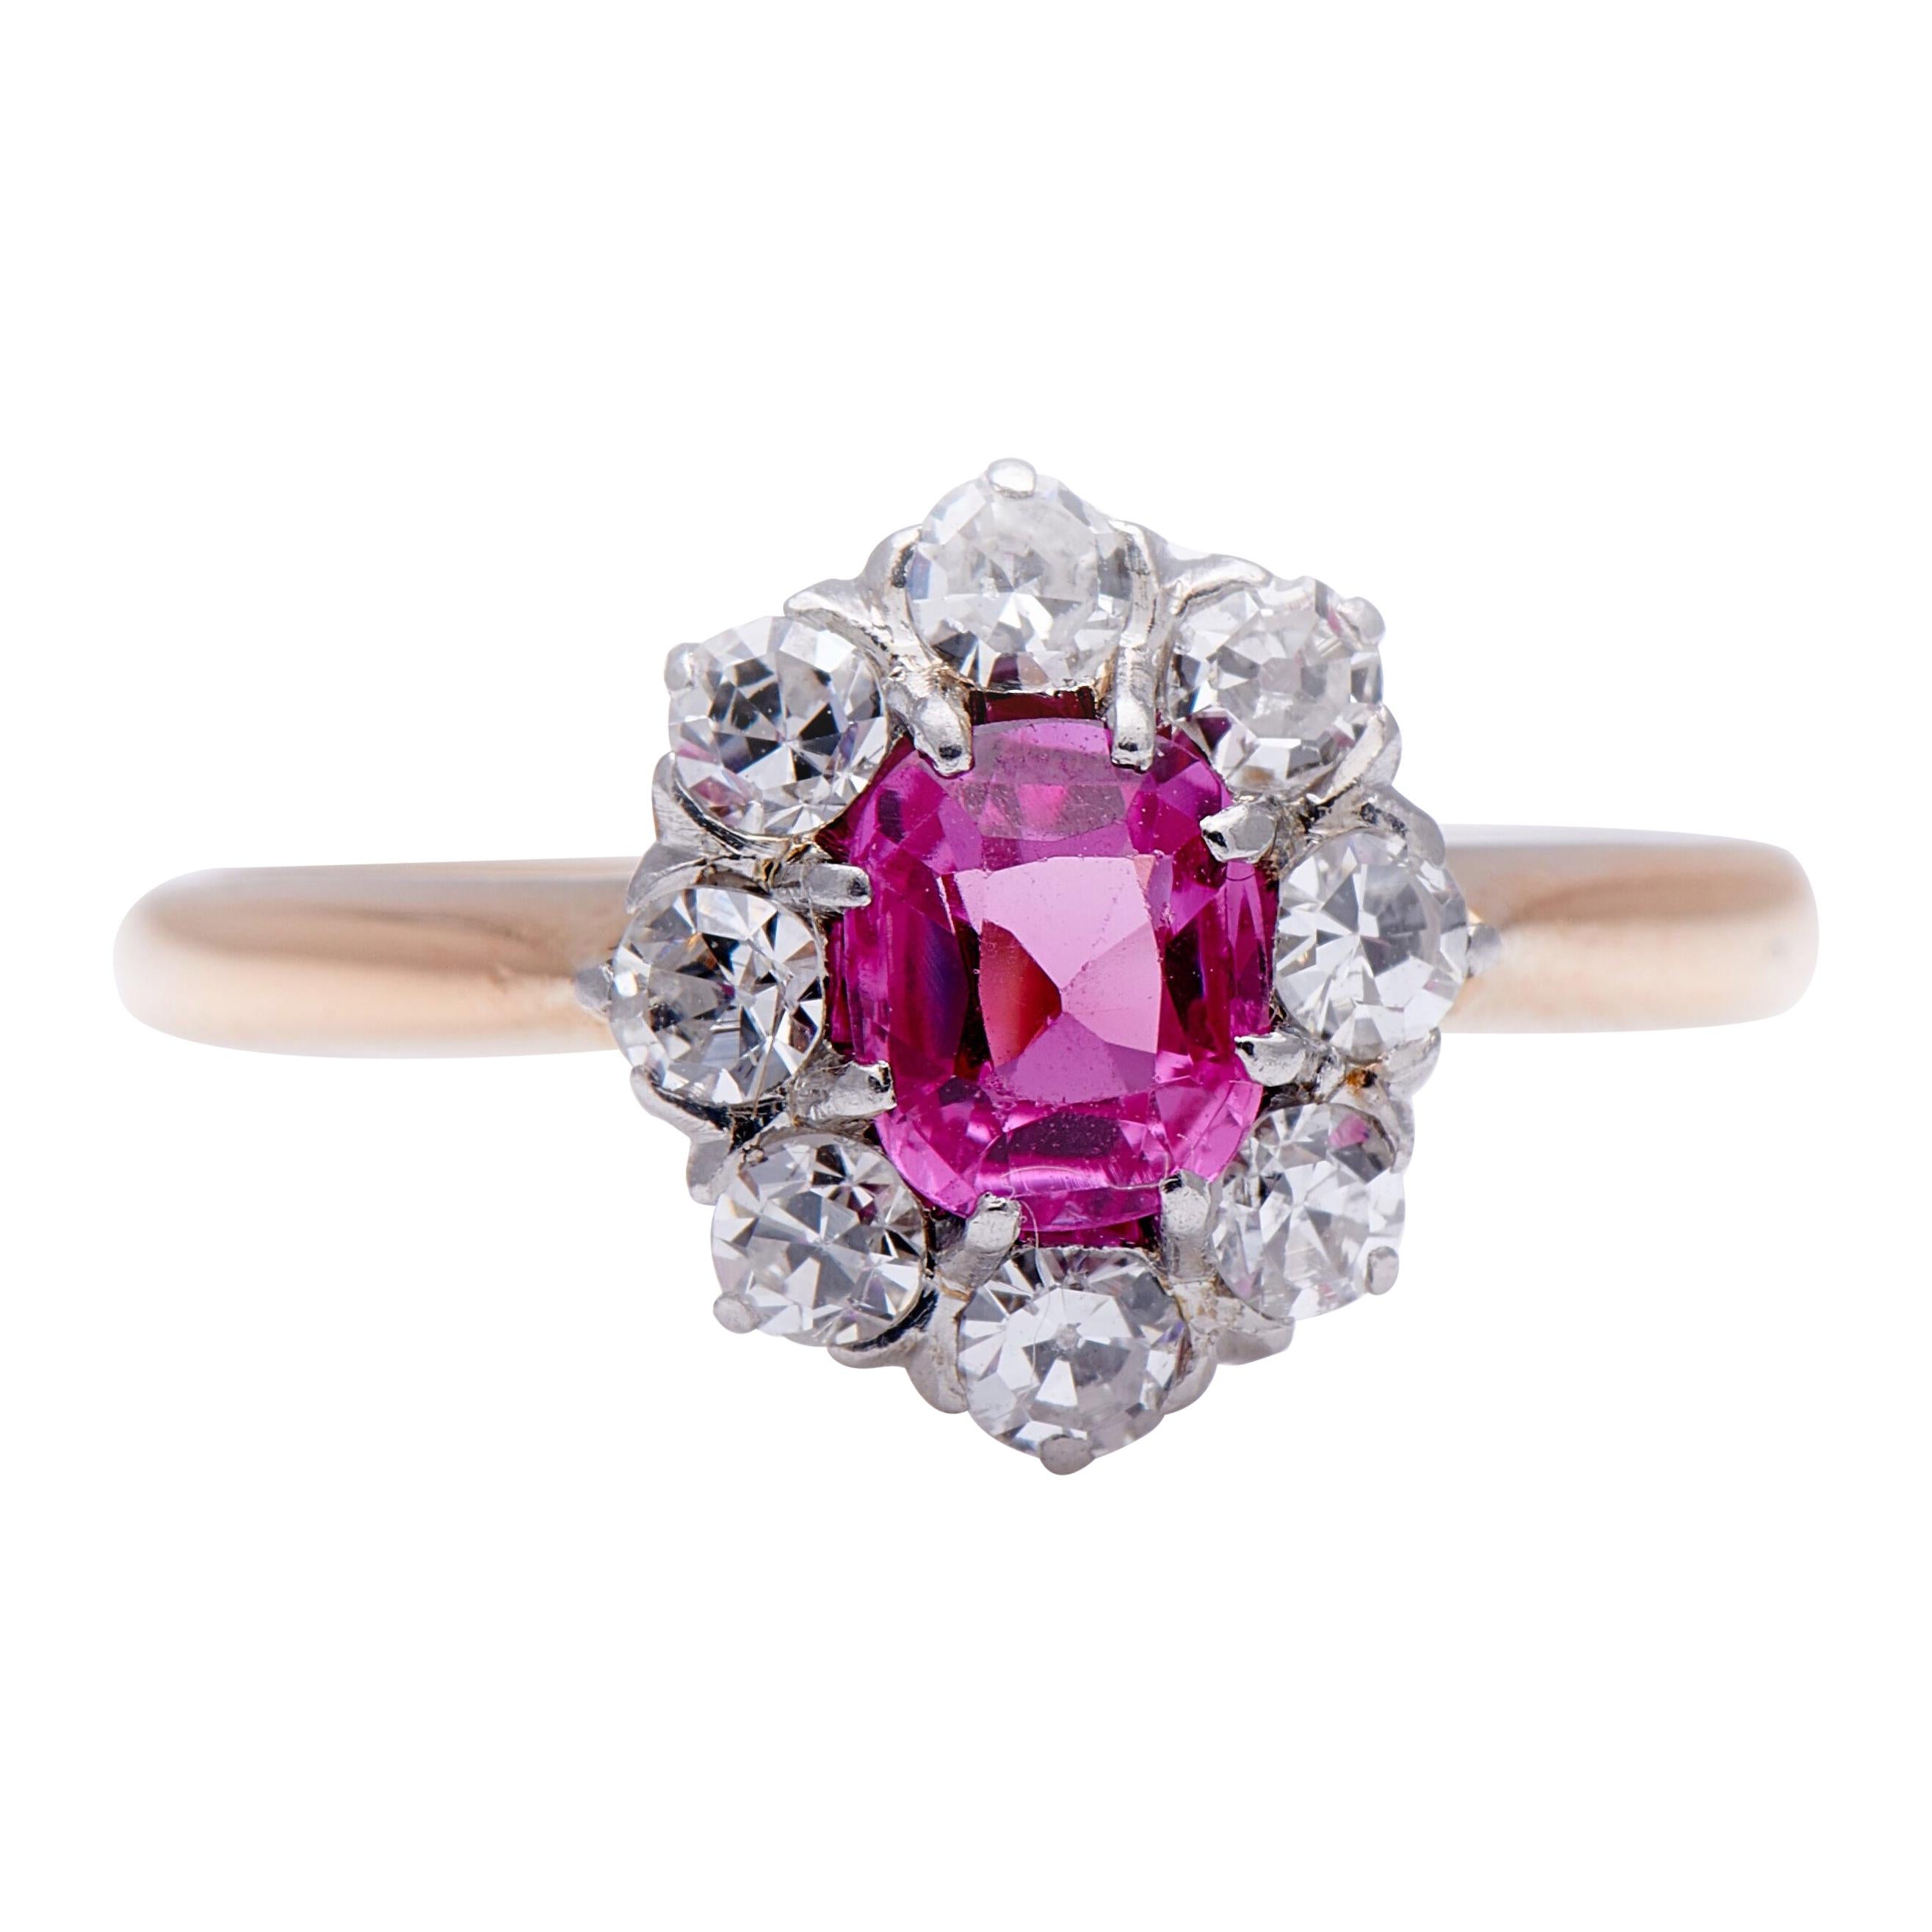 Antique, Art Deco, Pink Sapphire and Diamond Cluster Engagement Ring